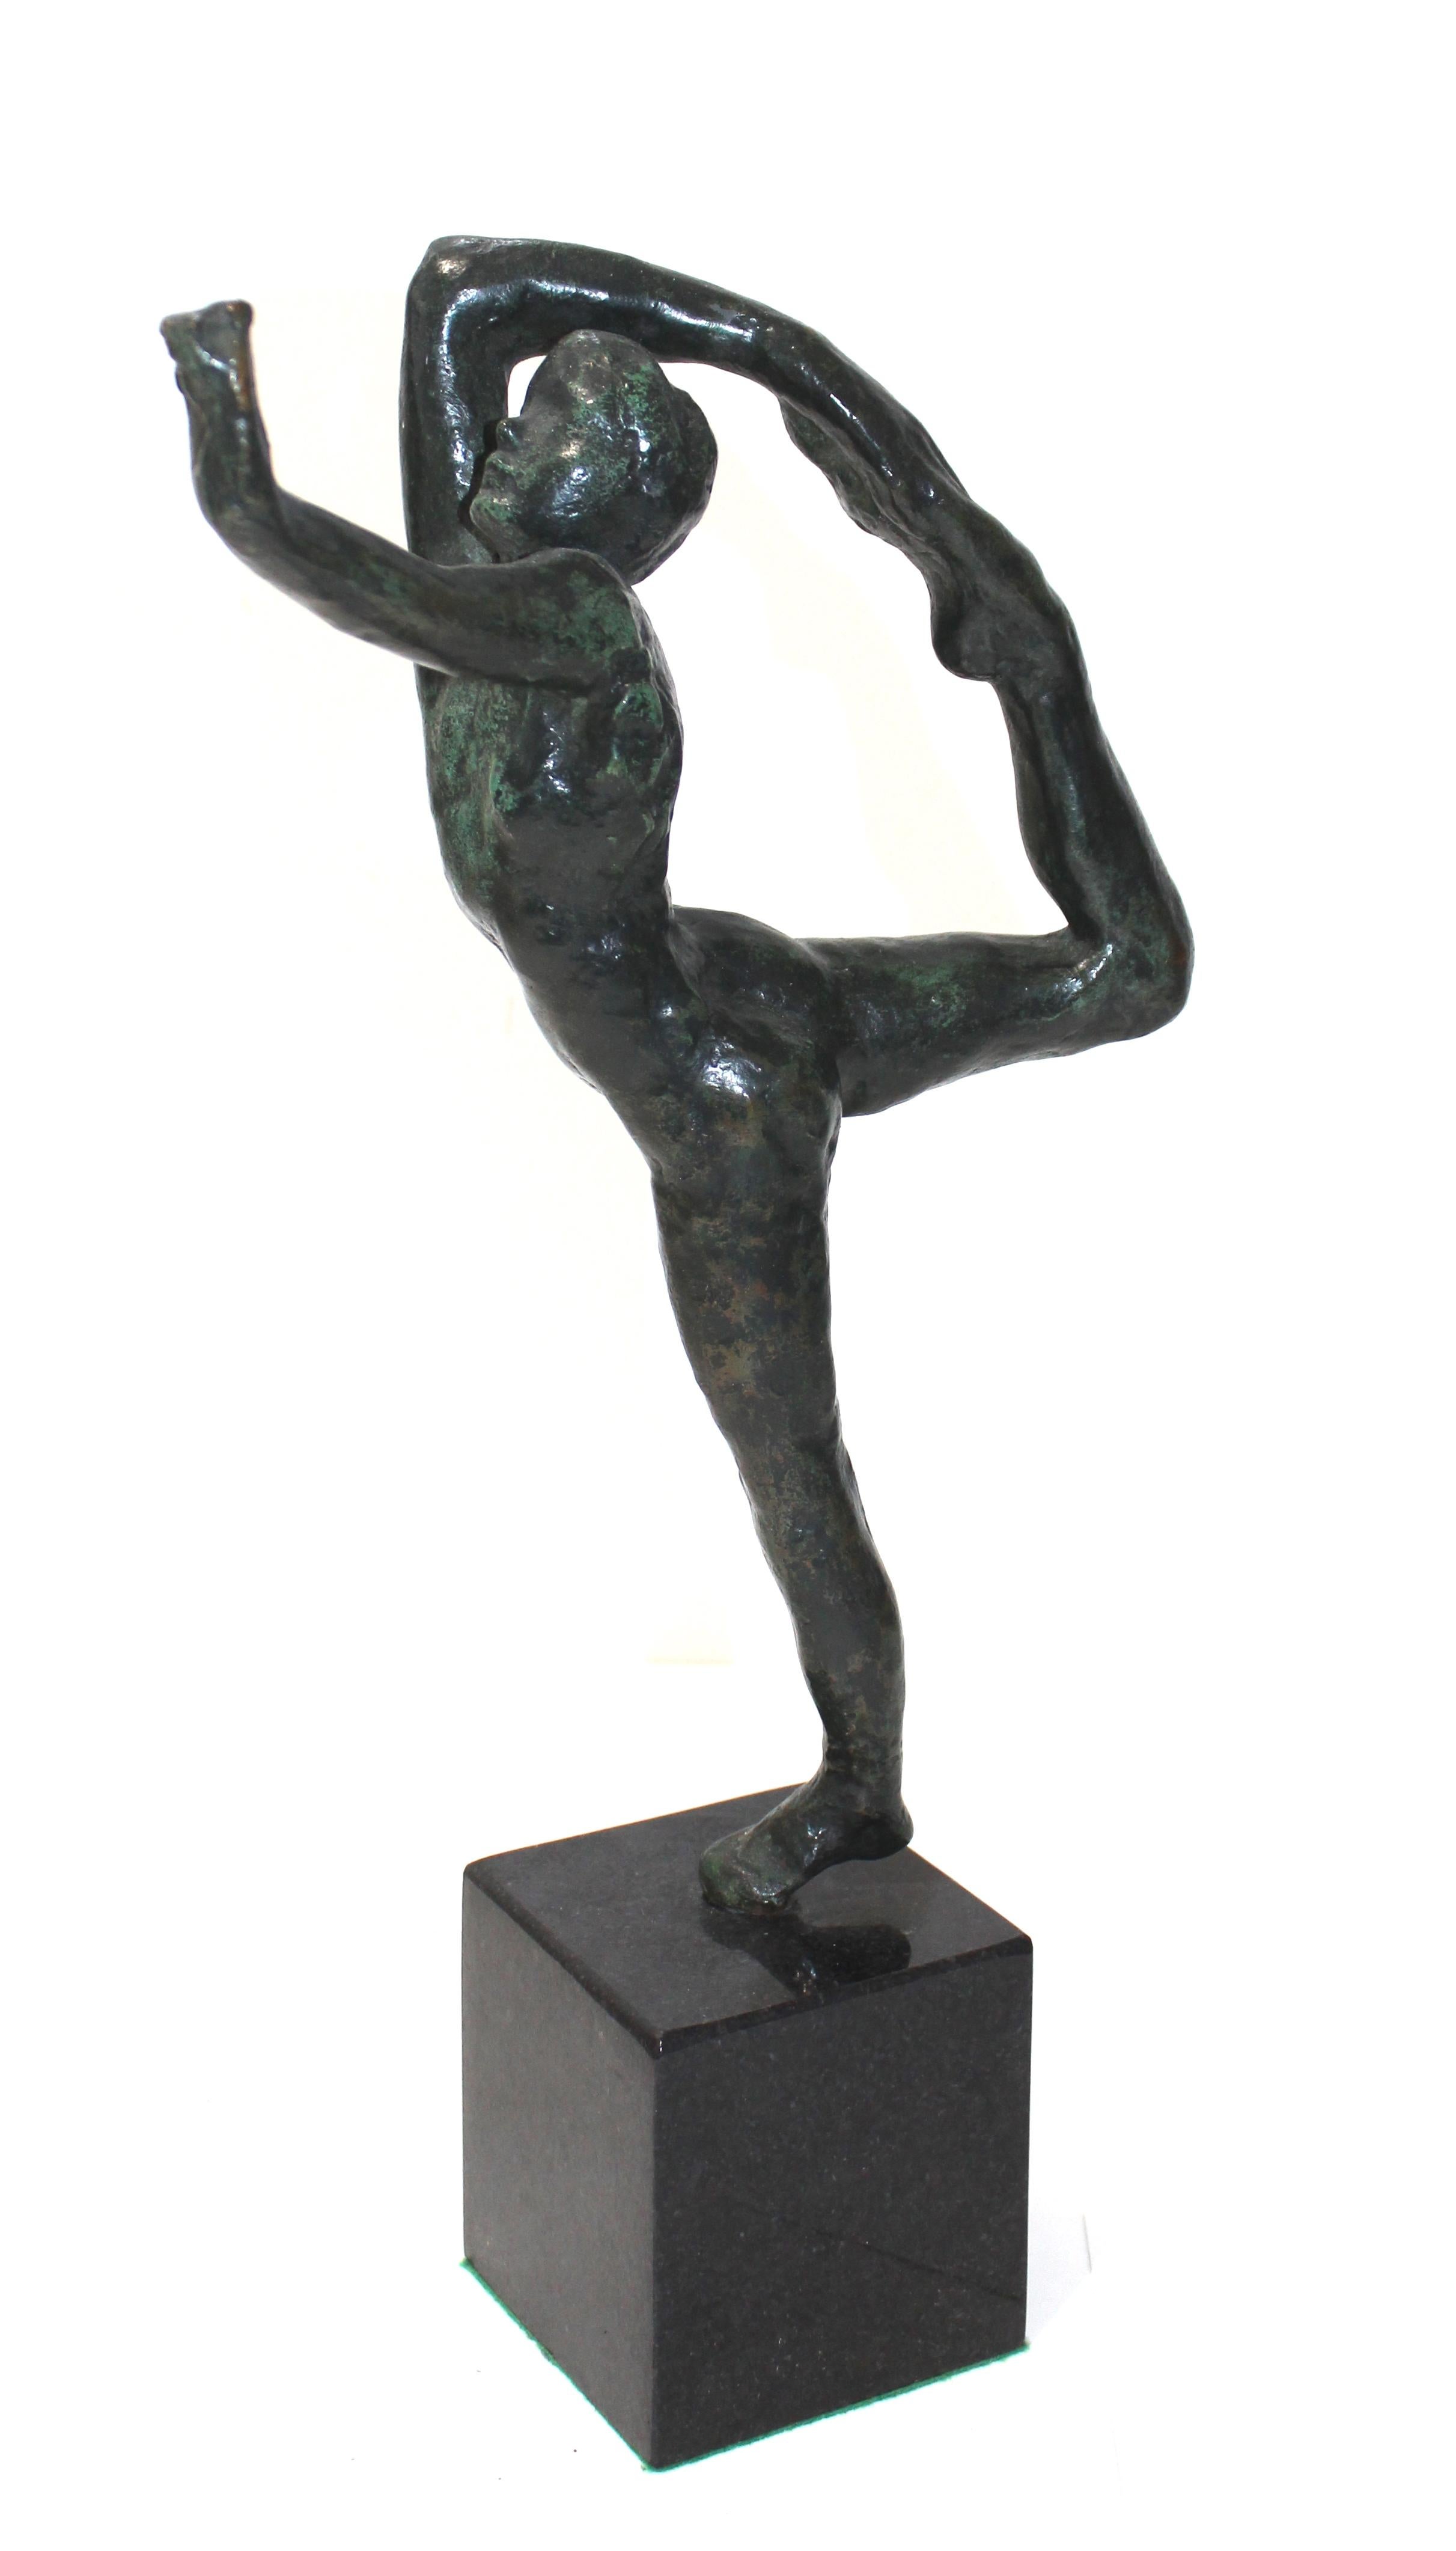 Bronze Sculpture of a Dancer in the manner of Auguste Rodin, from a Palm Beach estate.

Overall measurements 15